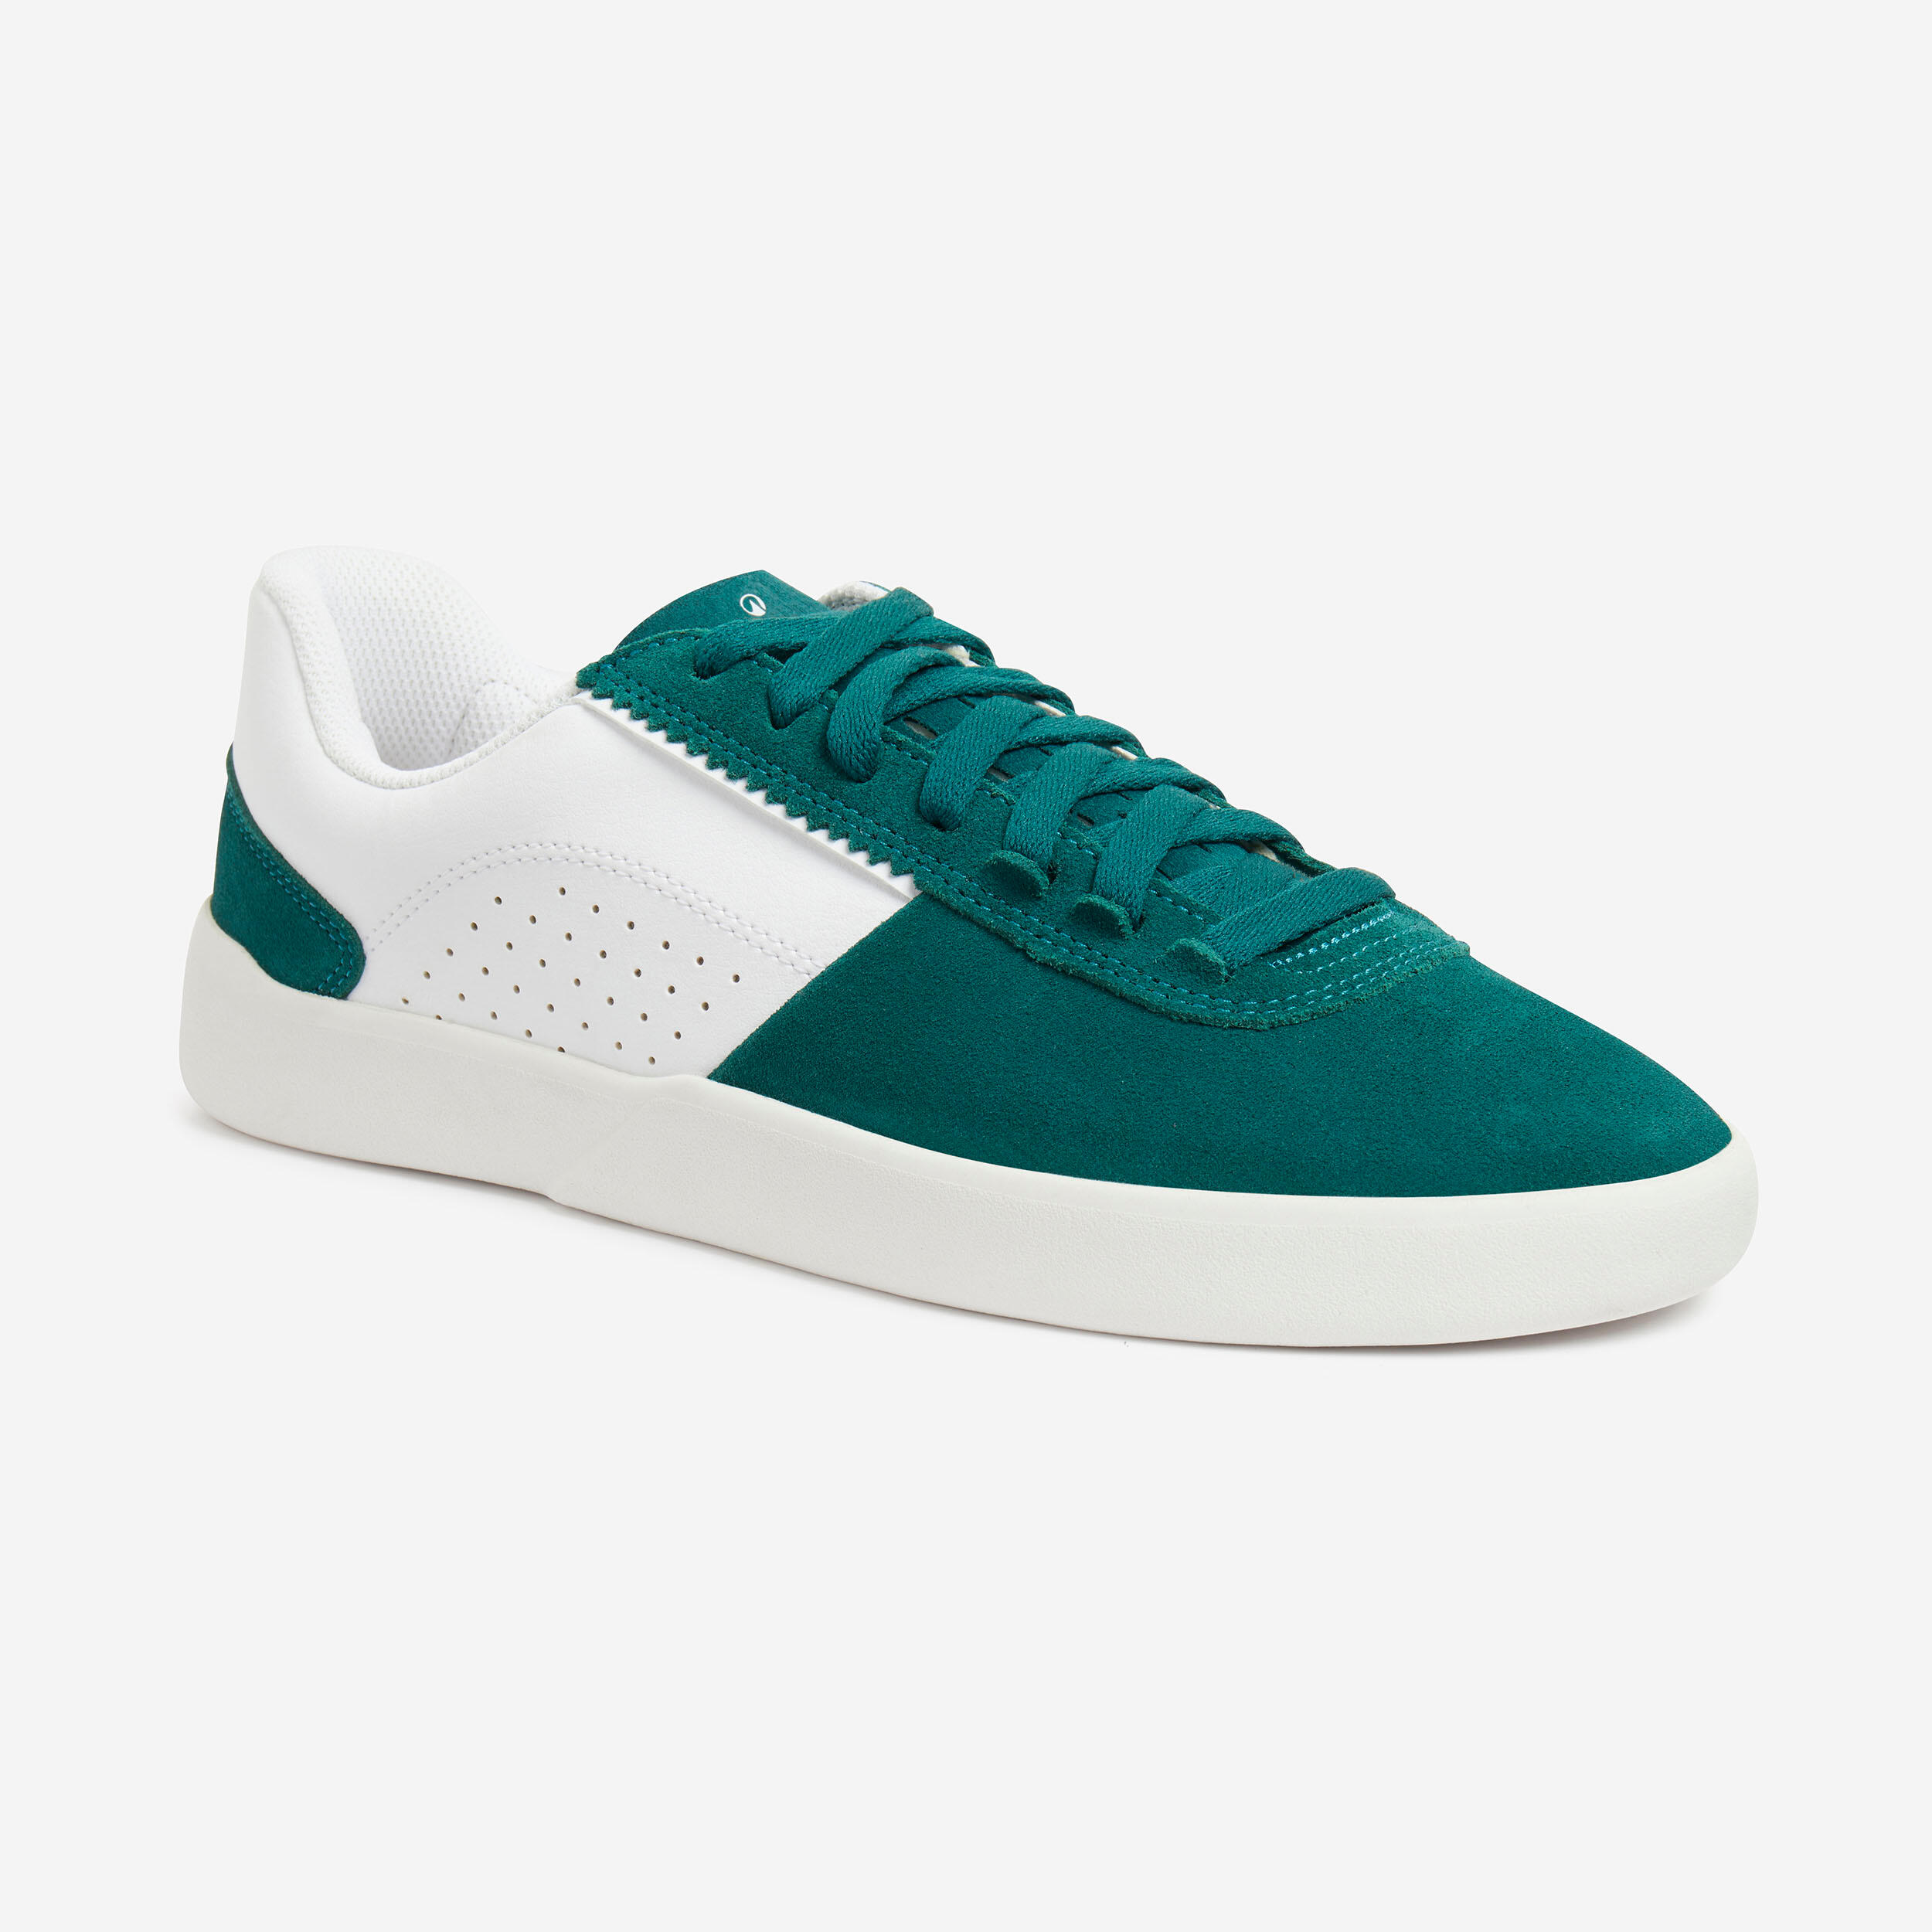 OXELO Adult Low-Top Cupsole Skate Shoes Crush 500 - Green/White